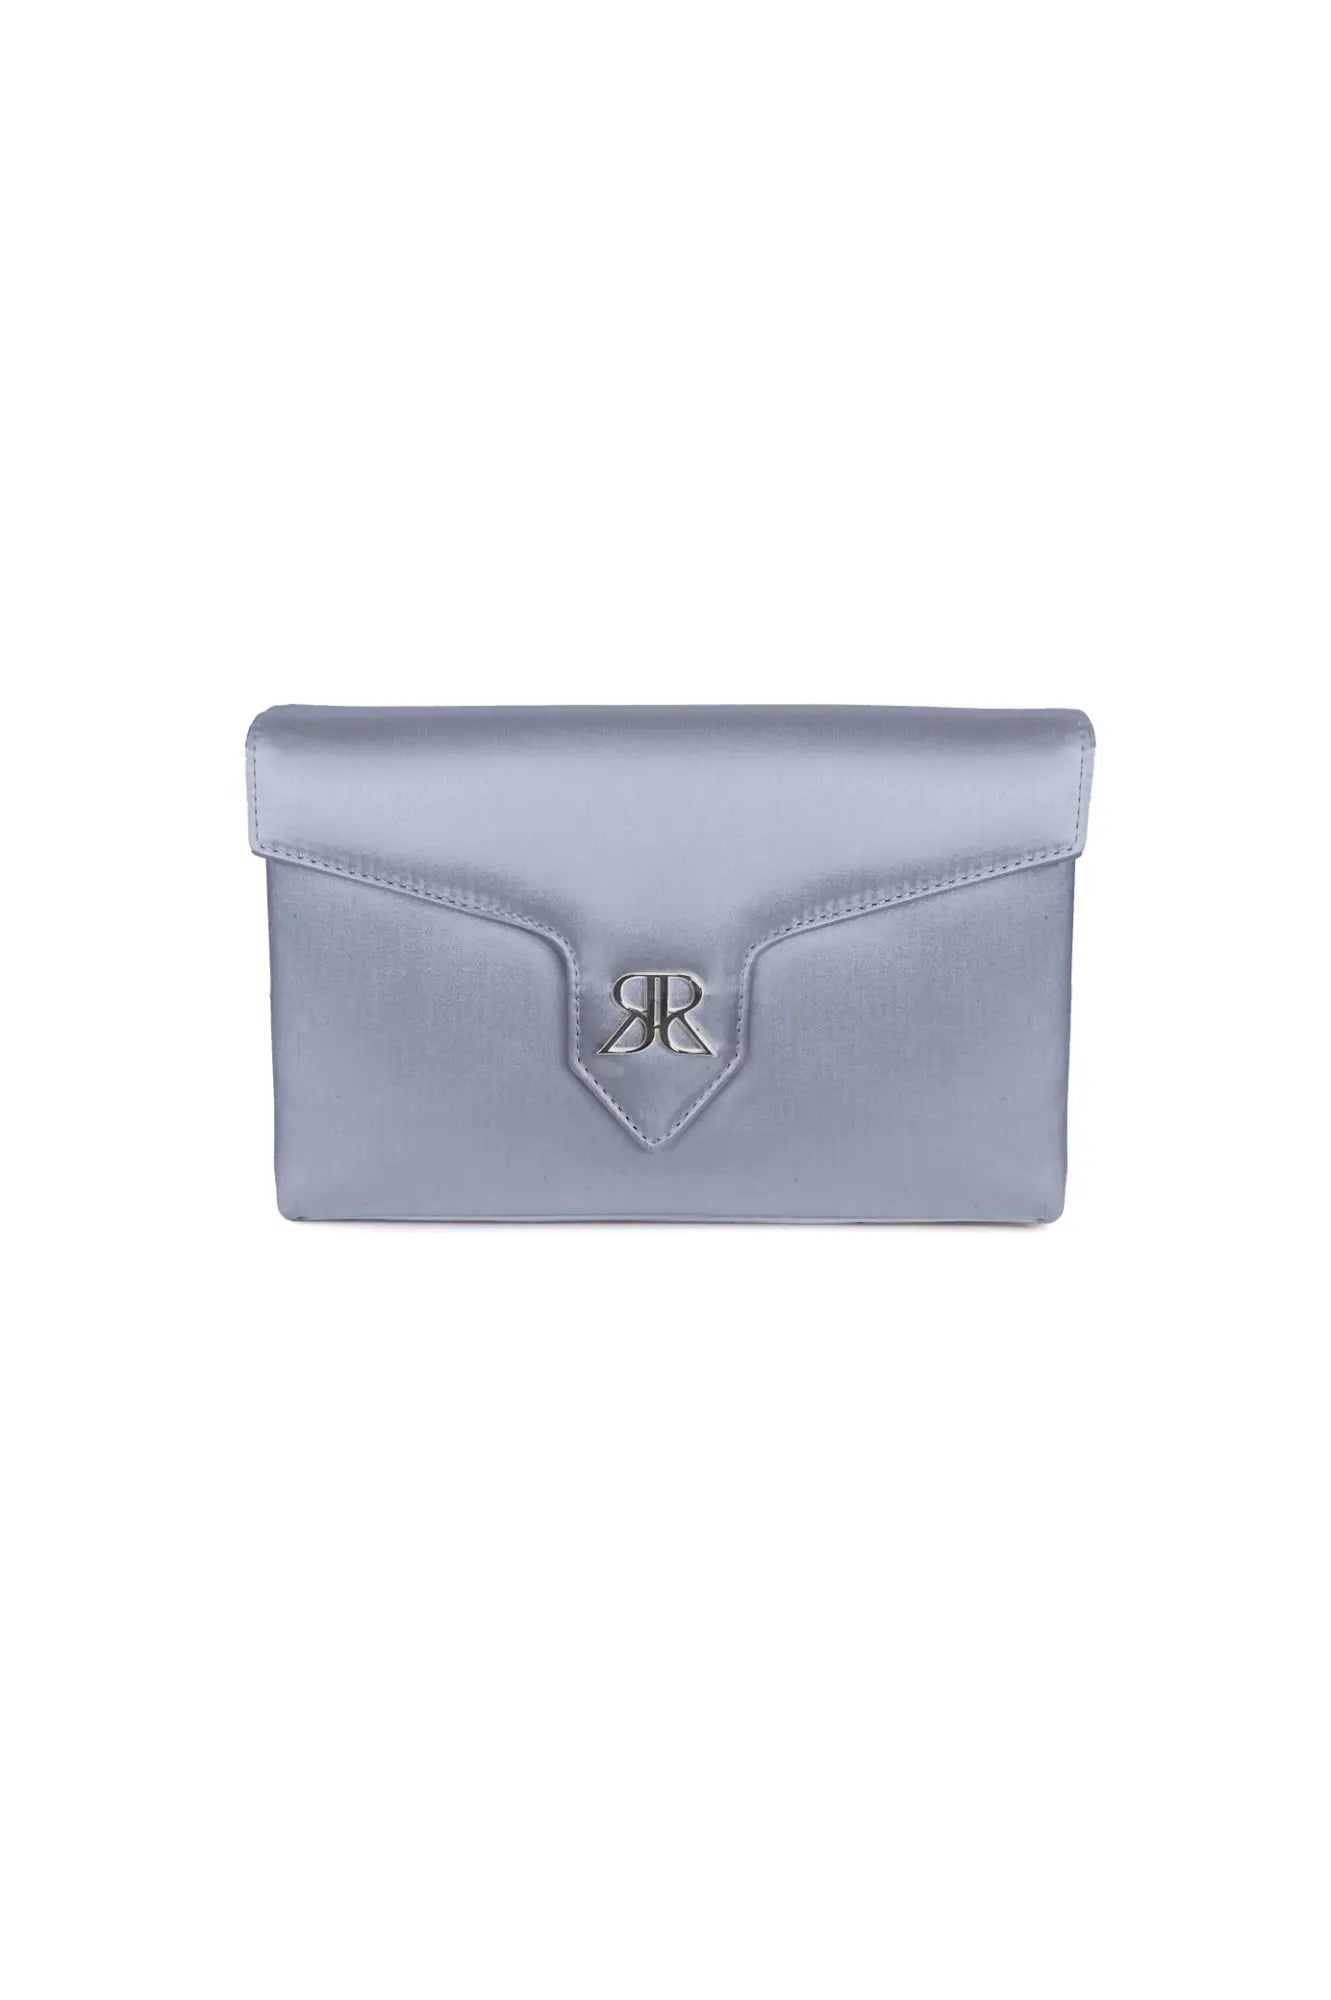 Love Note Envelope Clutch Steel Blue clutch bag with a metallic fastener on a white background by The Bella Rosa Collection.